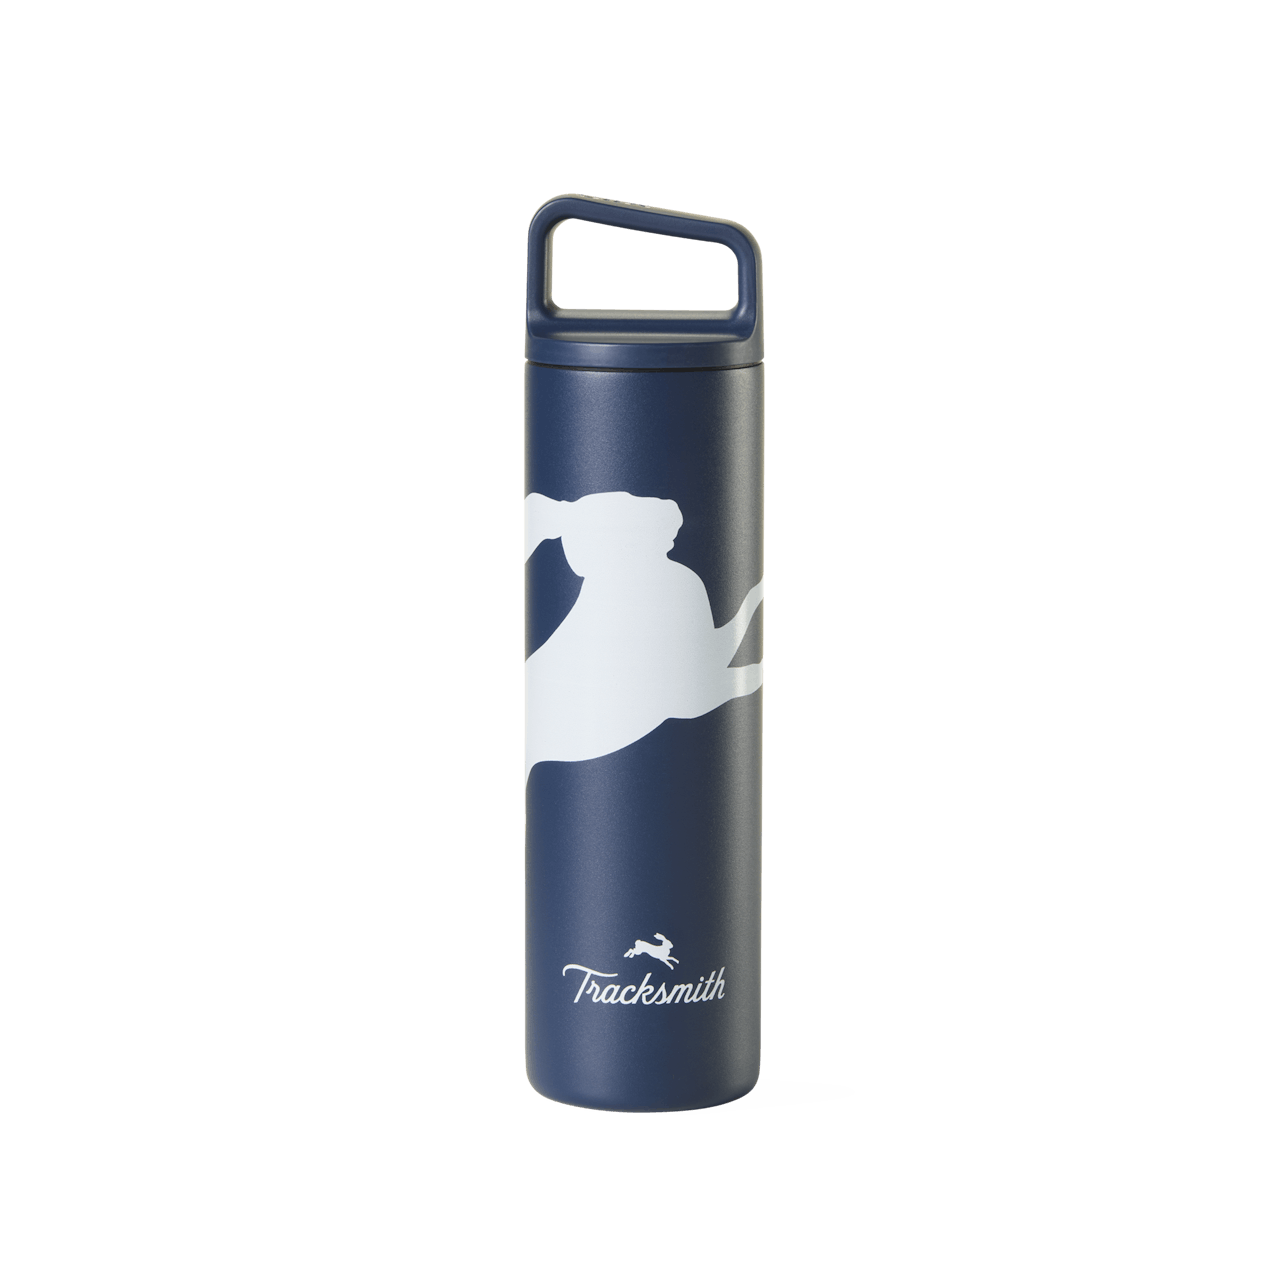 https://tracksmith-media.imgix.net/Fal22-Navy-Insulated-Water-Bottle_3081a580-e0e4-4799-8484-1b4f9f5900b4.png?auto=format,compress&crop=faces&dpr=2&fit=crop&h=640&w=640